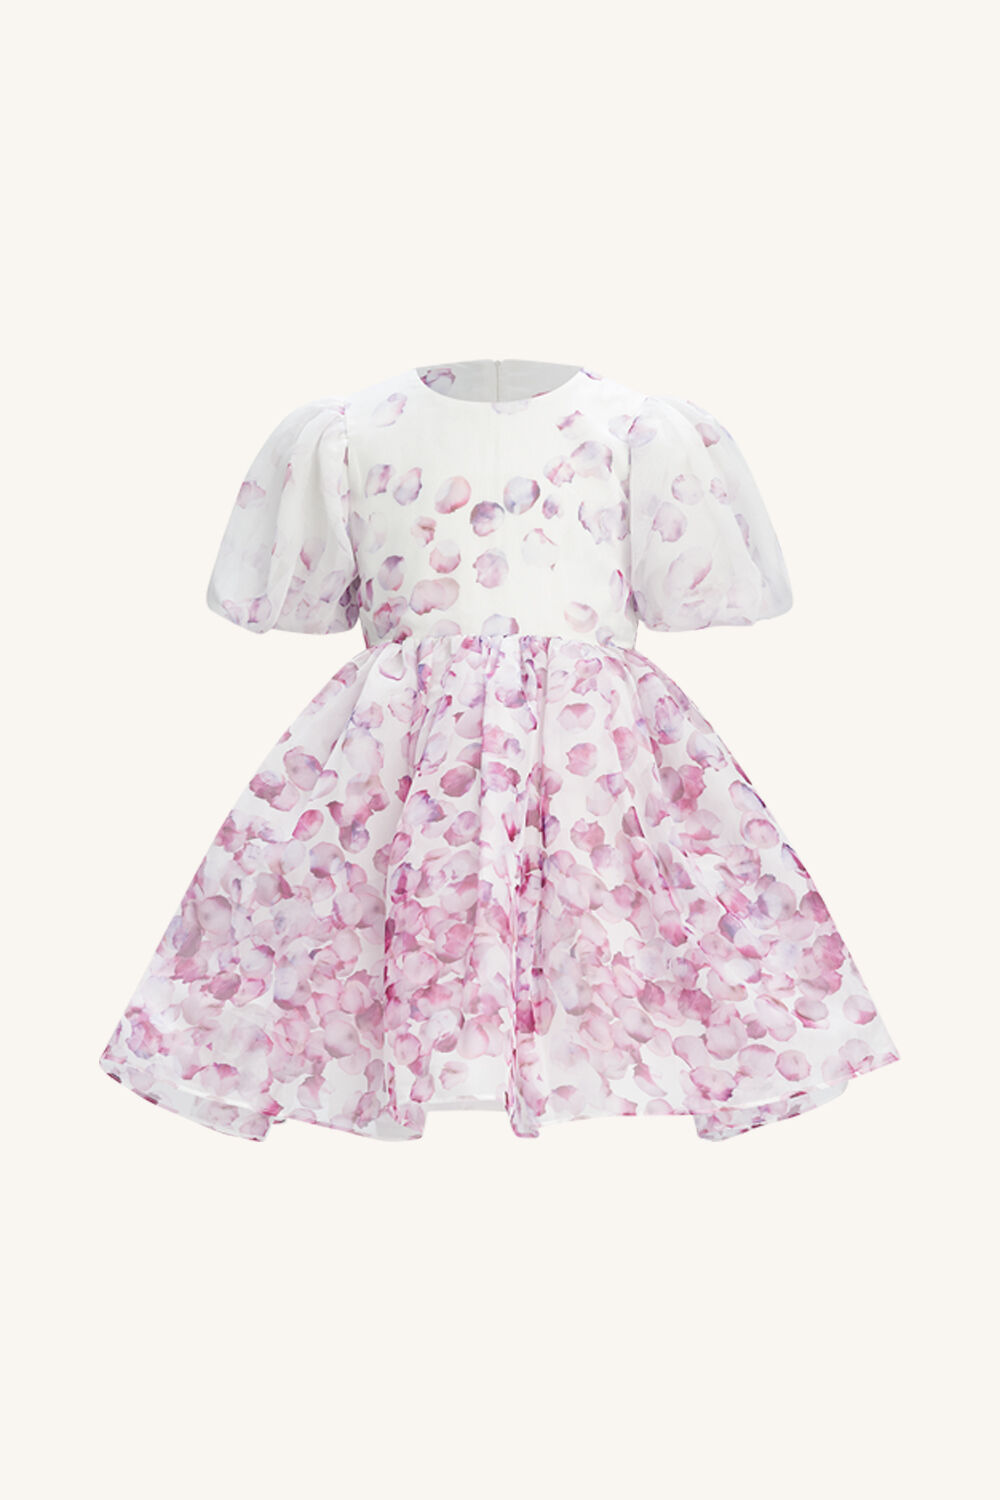 GIRLS HALEY PUFF MINI DRESS in colour PINK CARNATION